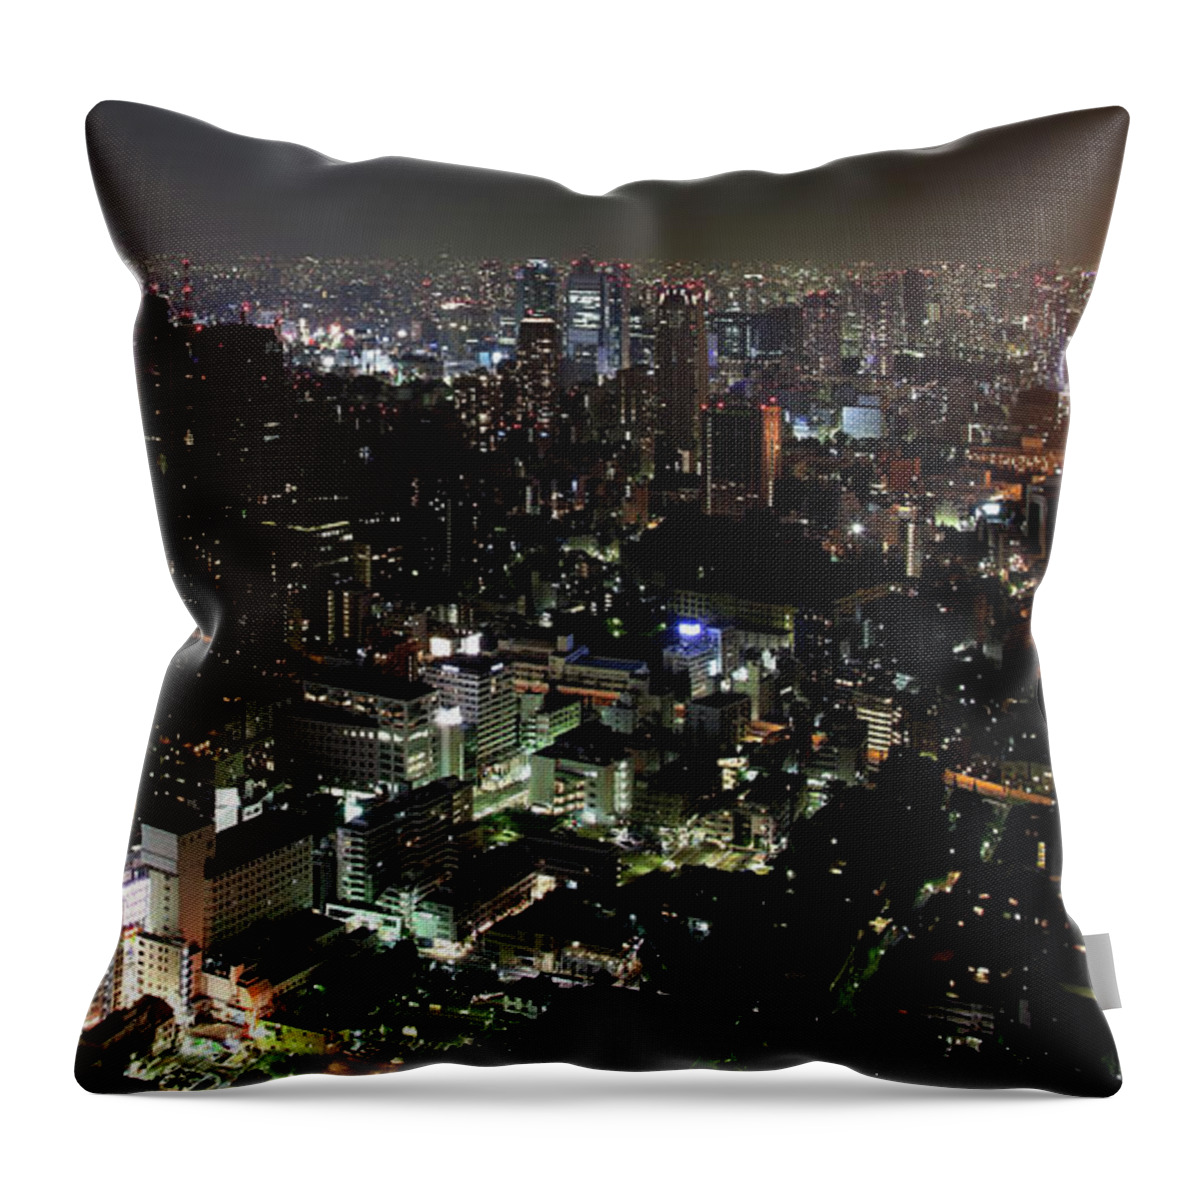 Tokyo Tower Throw Pillow featuring the photograph Tokyo By Night Skyline, Japan by Fototrav